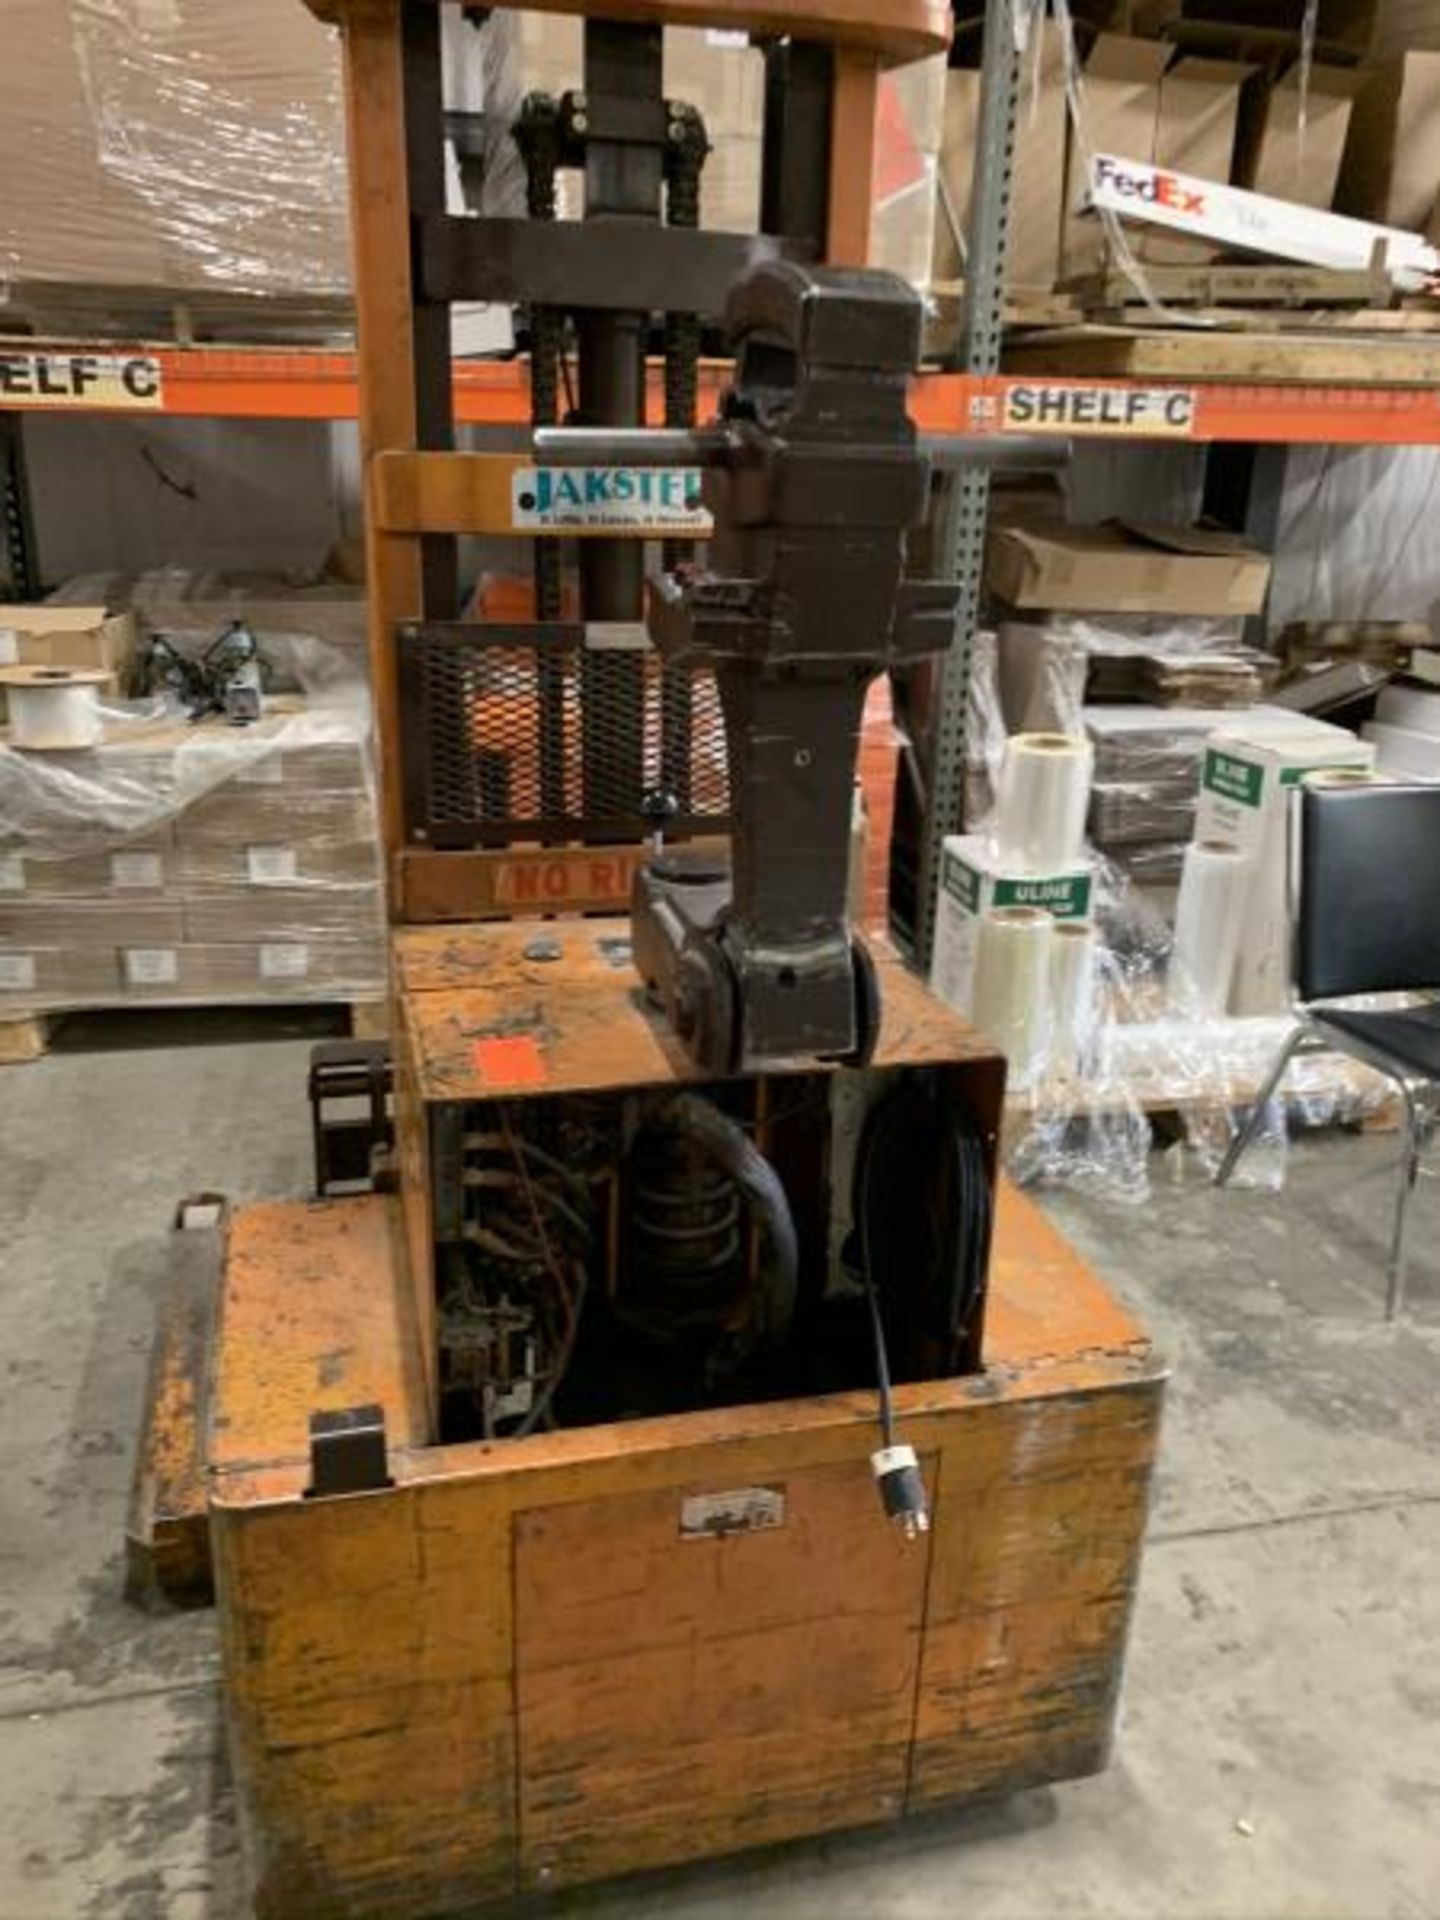 Big Joe Jakster electrical pallet jack, works but likely needs new battery, Model: B7796-LO, SN: - Image 2 of 4